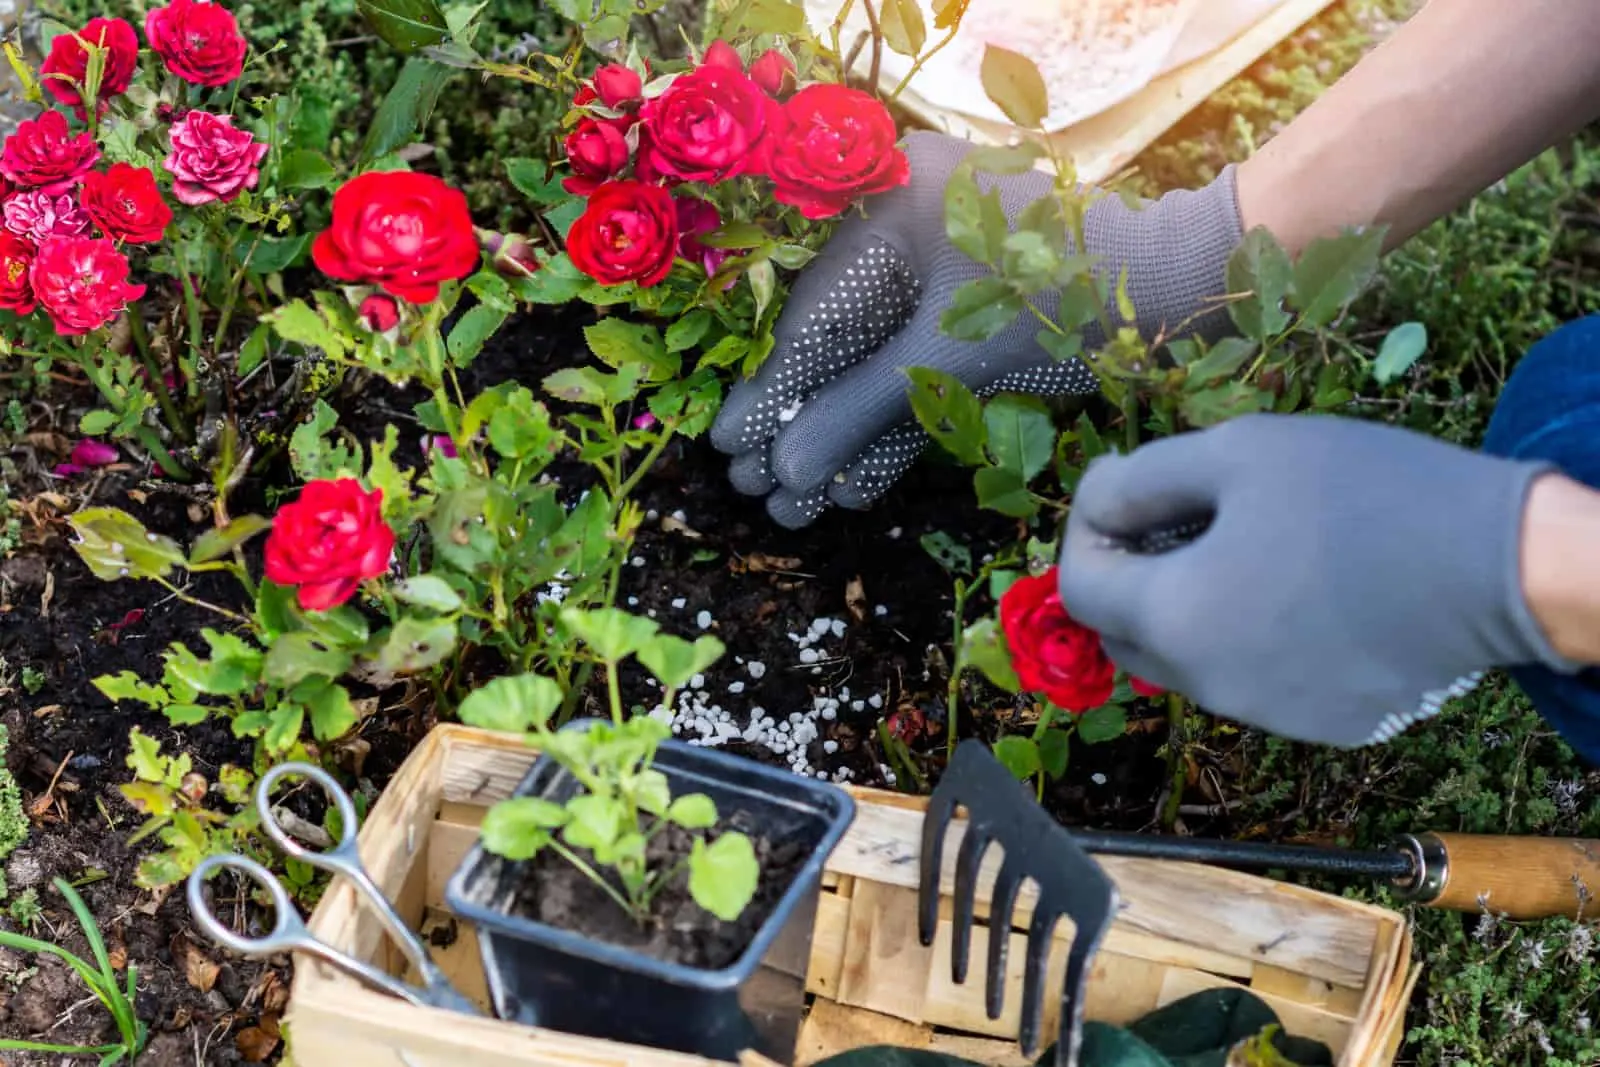 Woman hand in protective gloves is fertilizing bushes of red roses